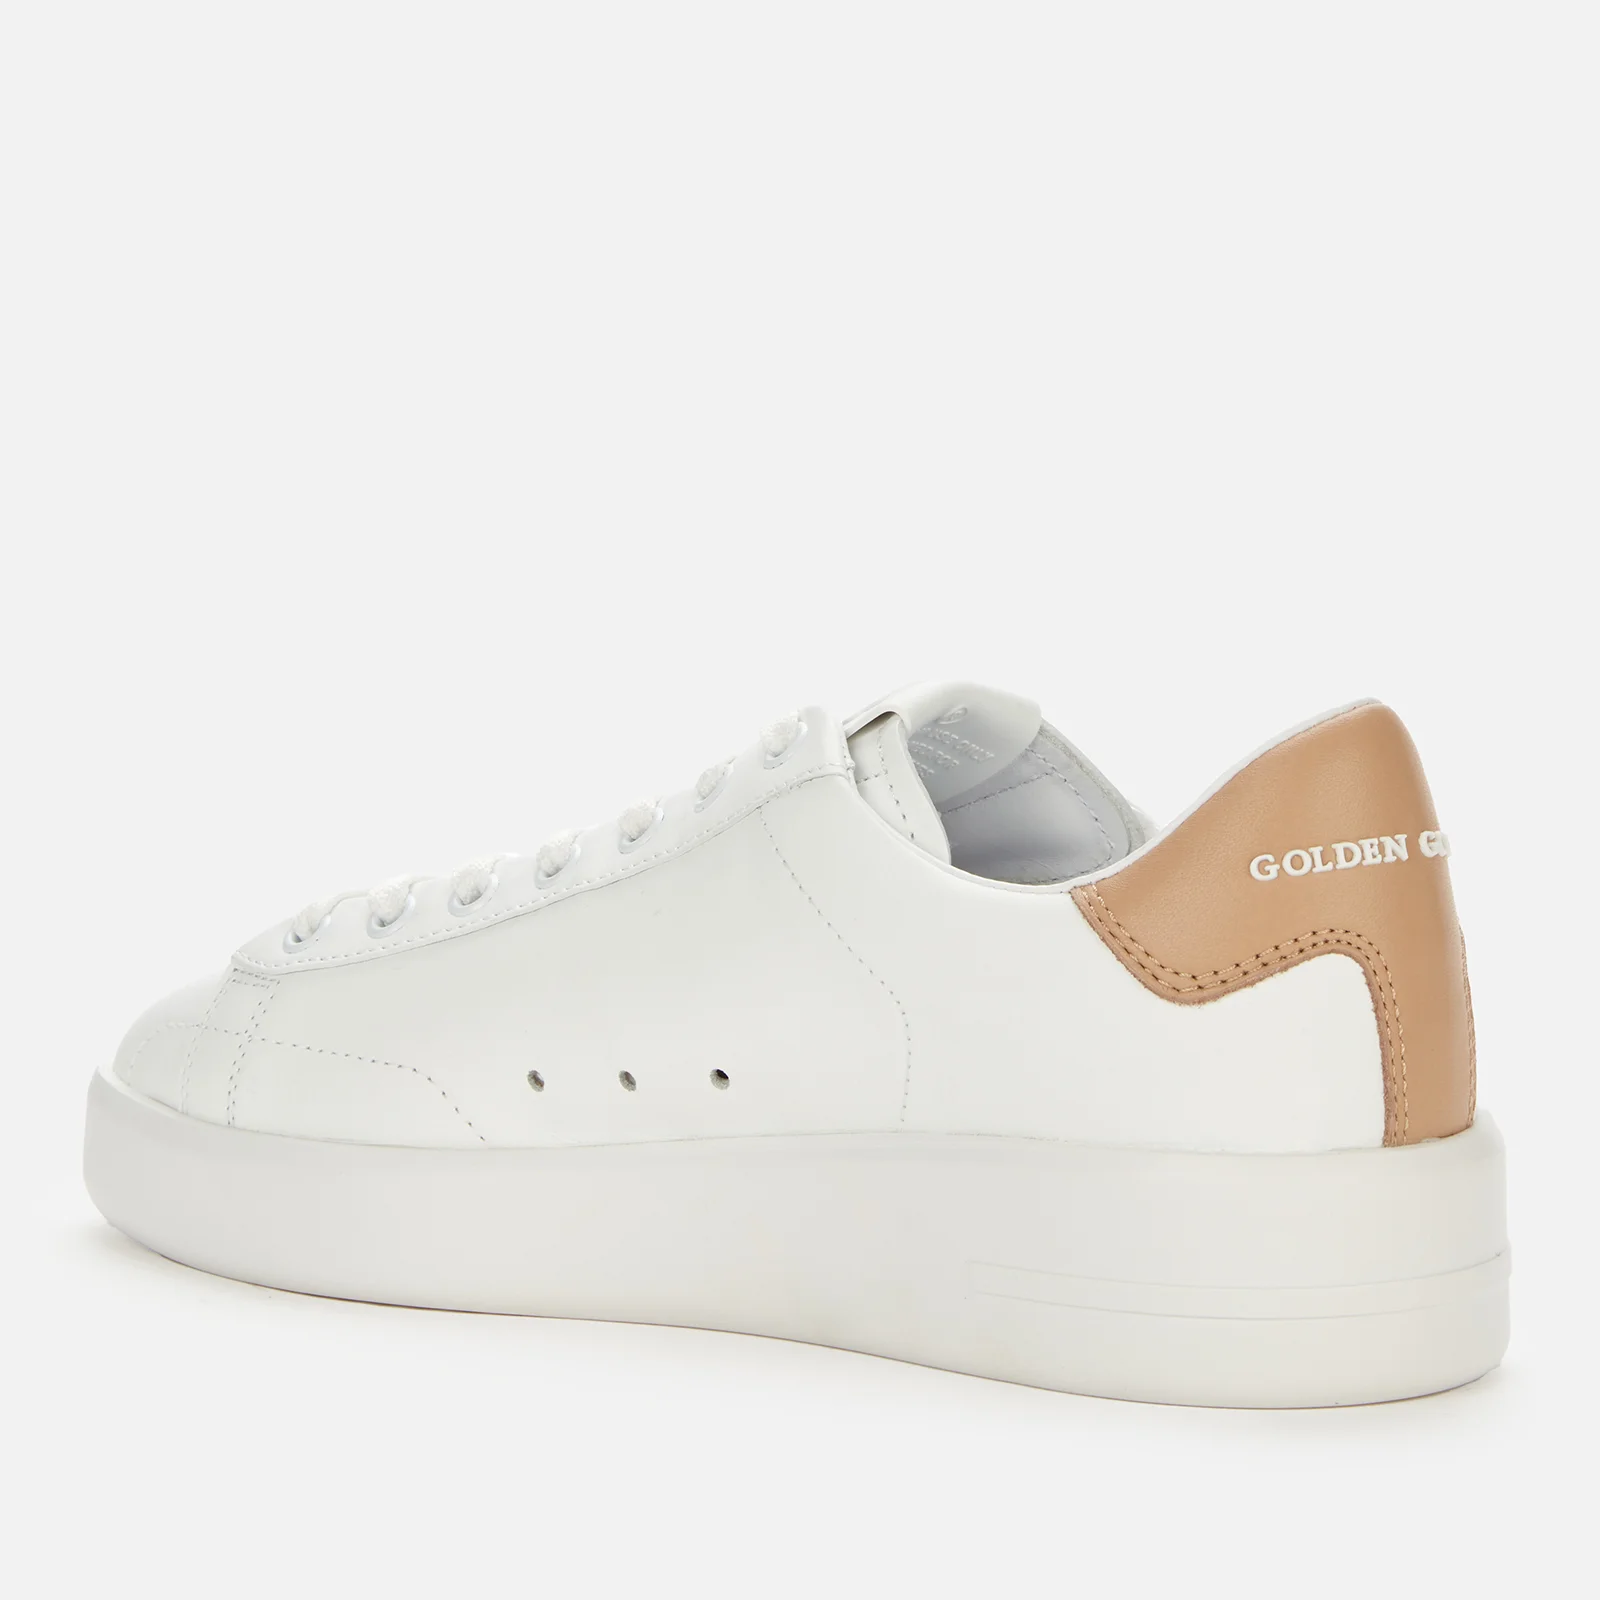 Golden Goose Women's Purestar Leather Chunky Trainers - White/Beige Image 1